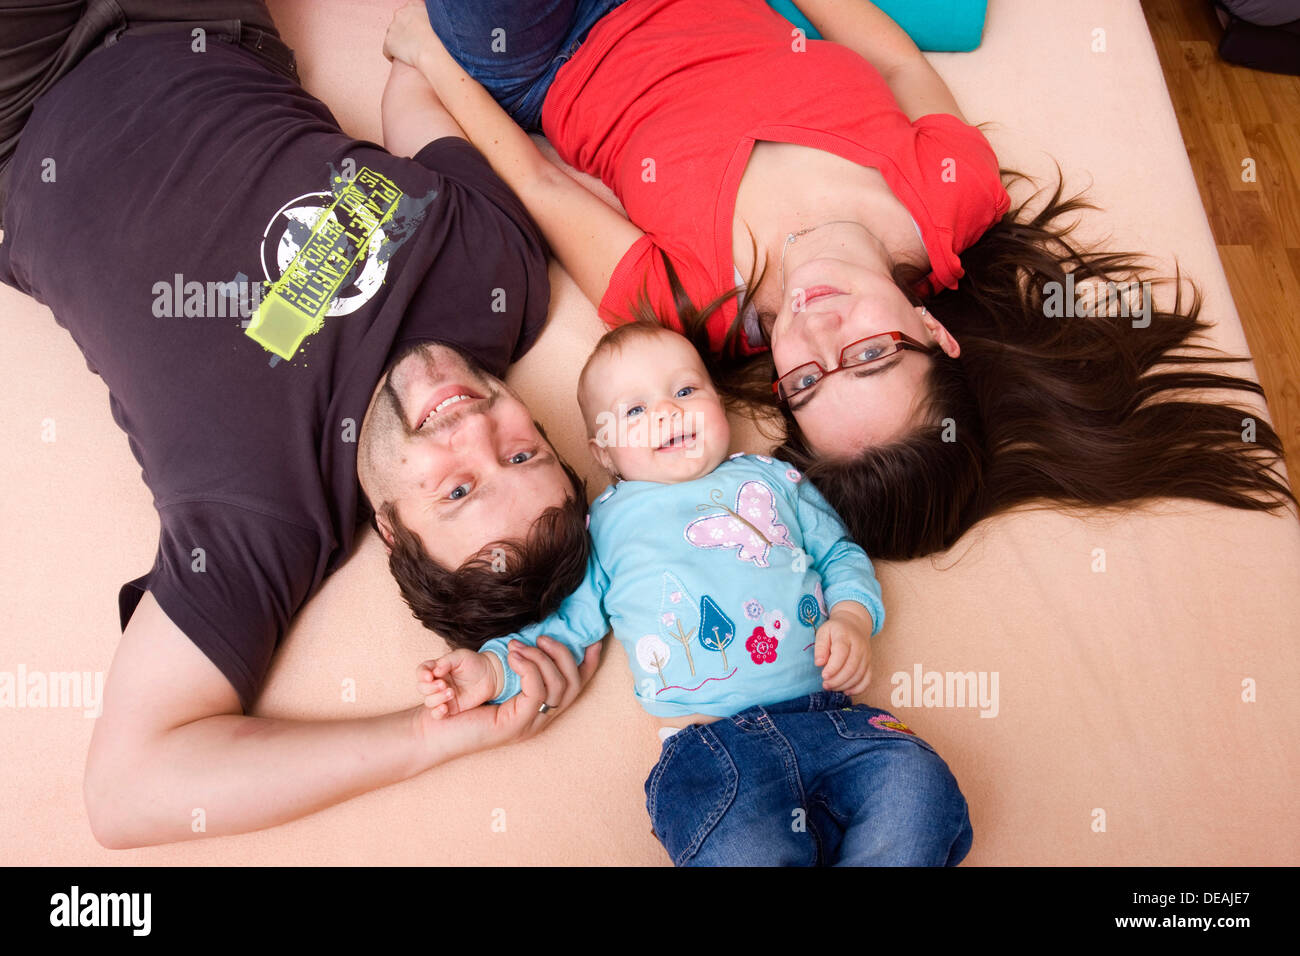 Family, mother, 28 years, father, 32 years, and baby, 1 year Stock Photo